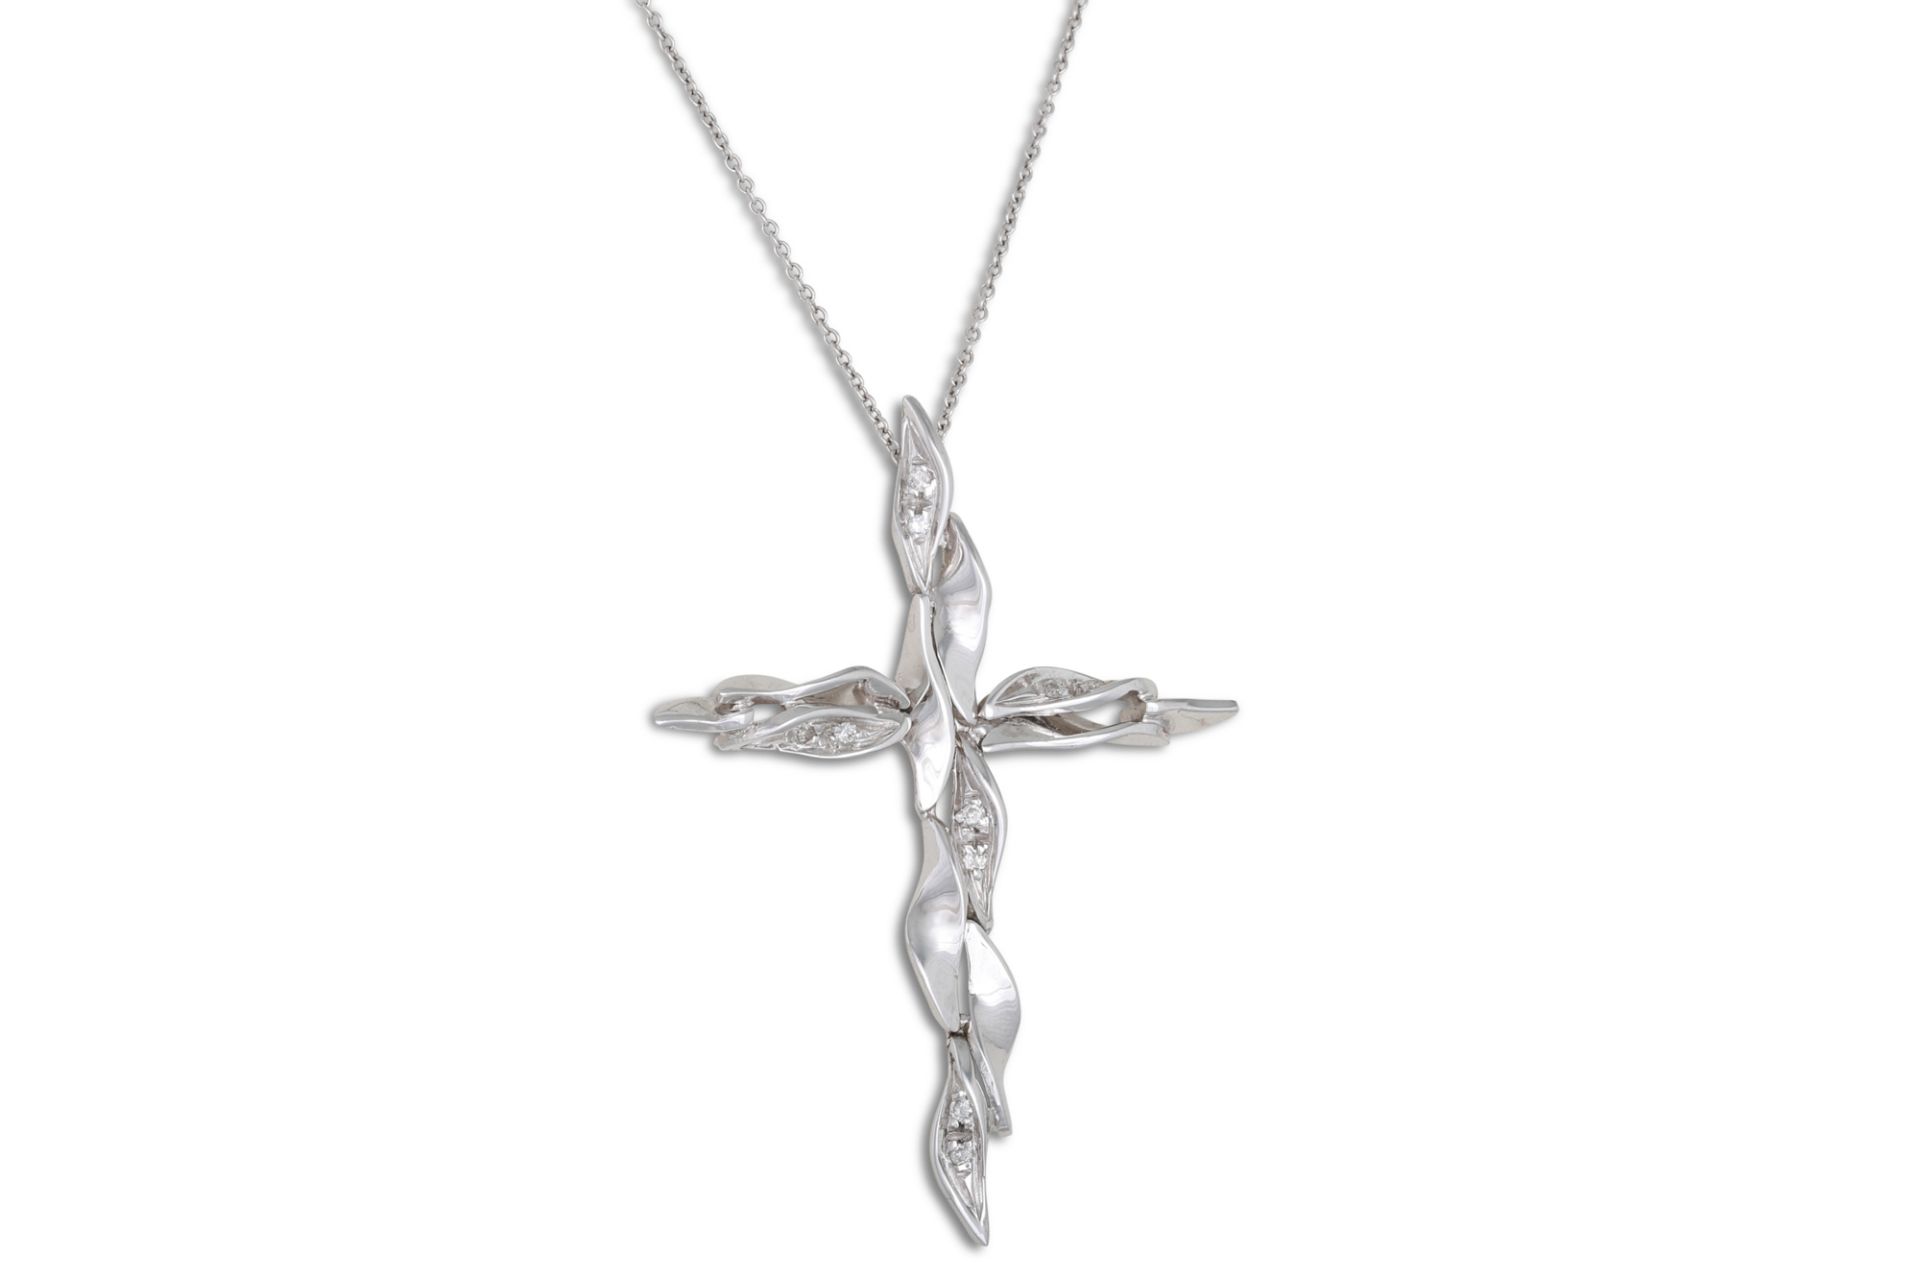 A DIAMOND SET CROSS, mounted in 18ct white gold on a white gold trace chain, 6.2 g.